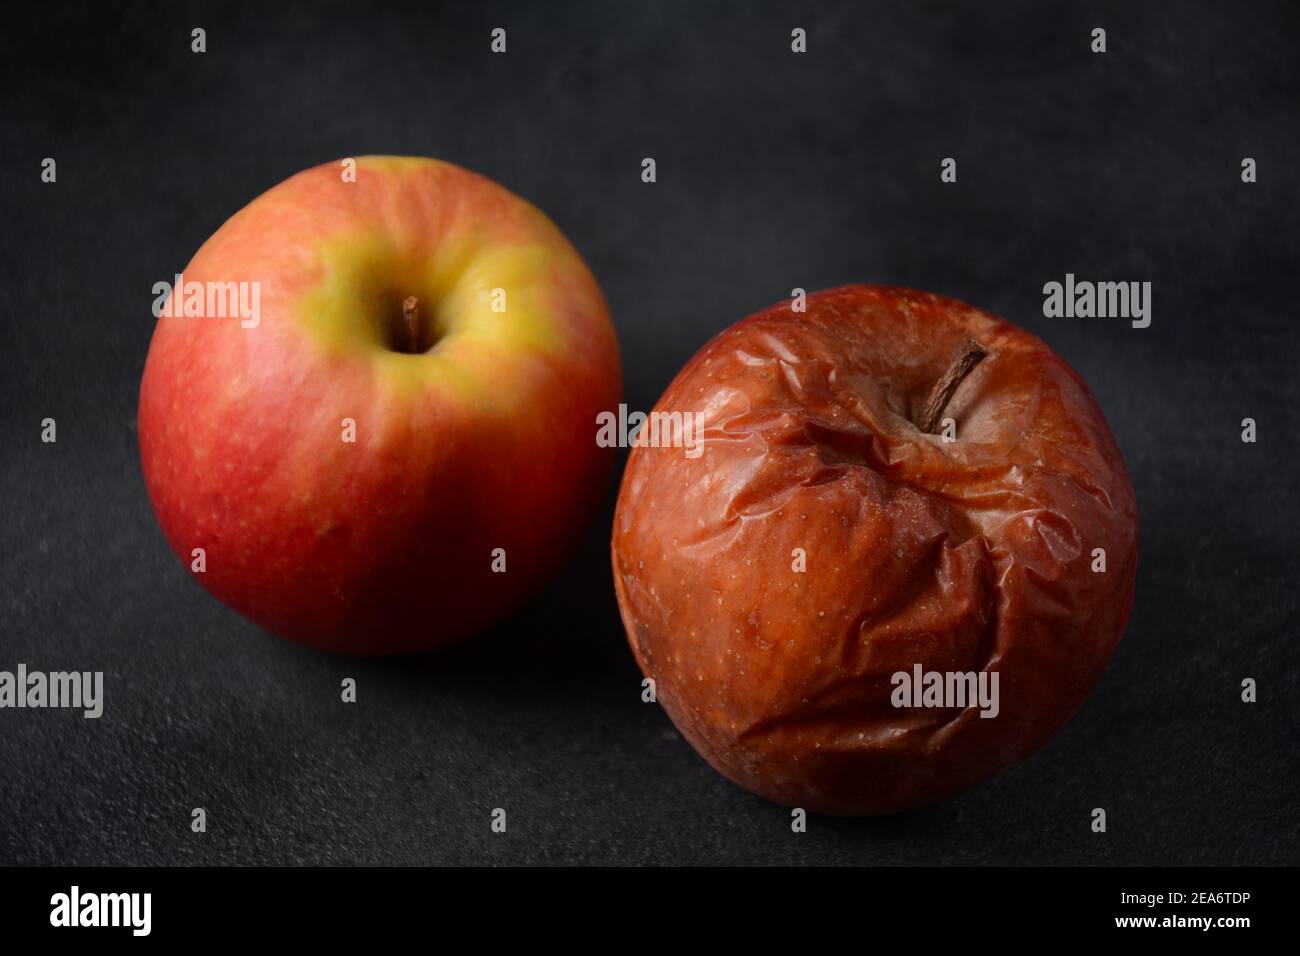 Rotten wrinkled skin apple and fresh apple on black background. Ugly food concept Stock Photo